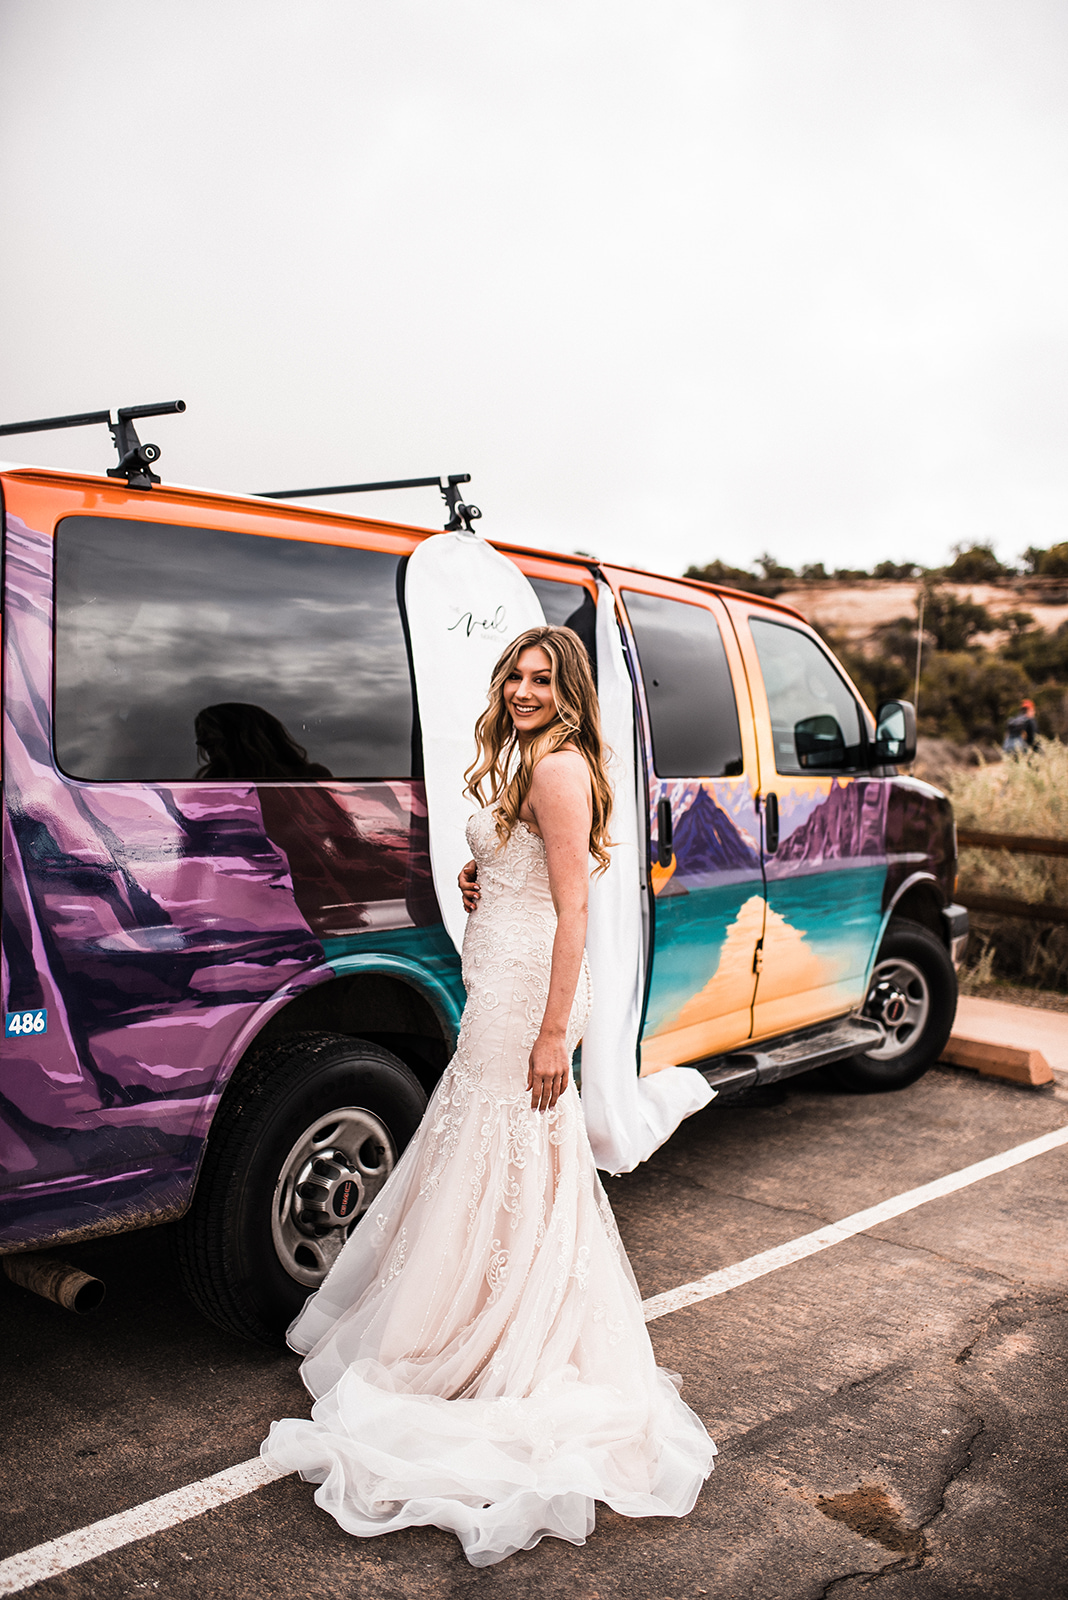 rent a Campervan for an adventure elopement. Image by: The Foxes Photography